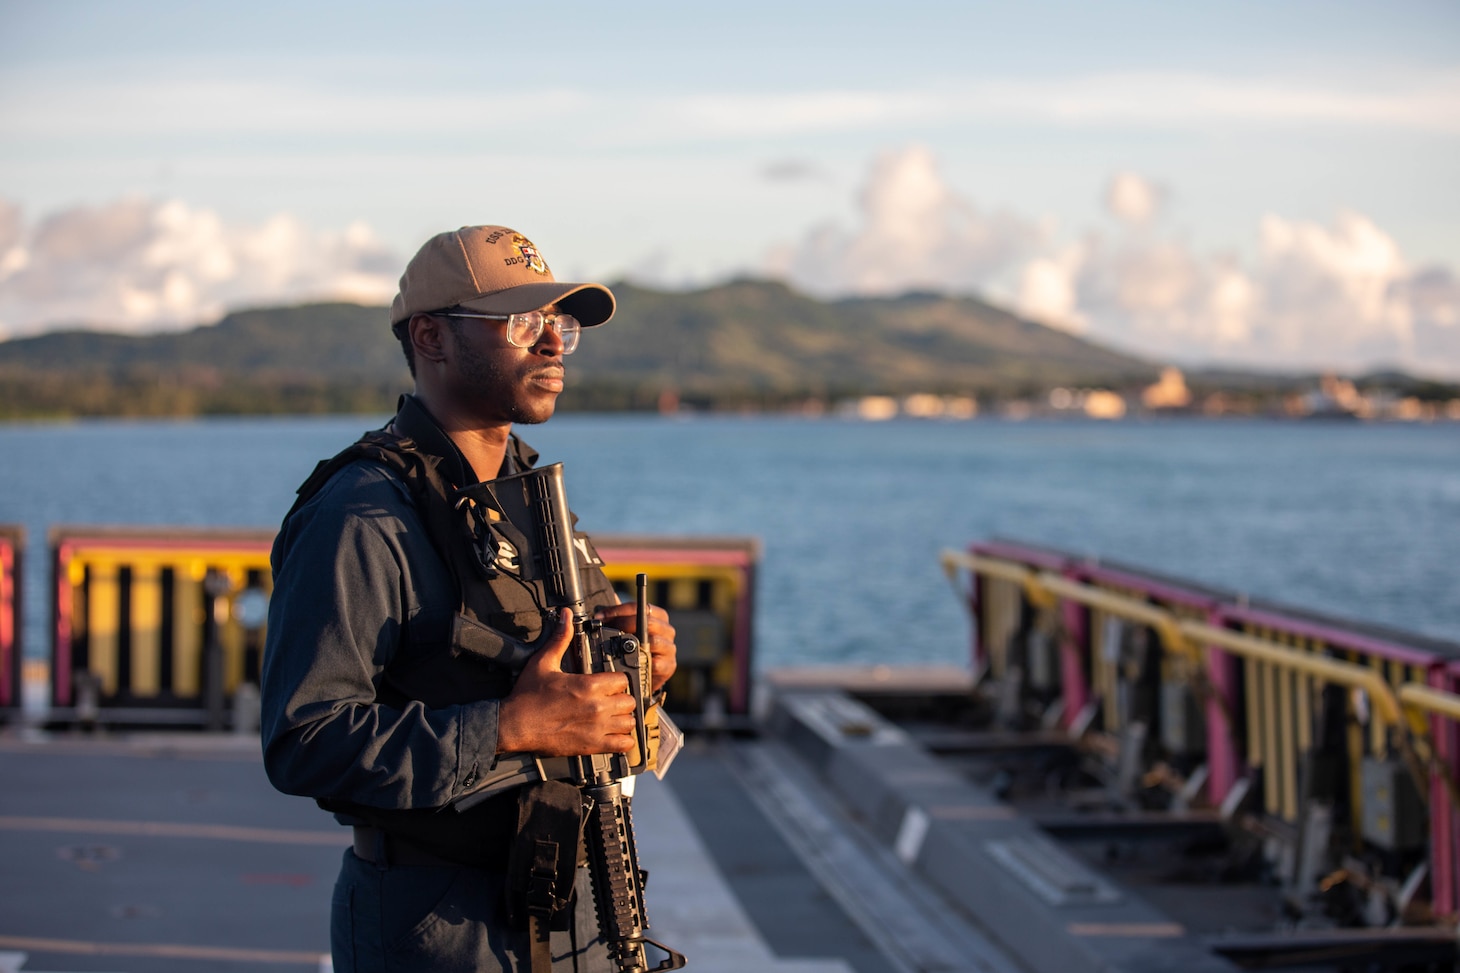 NAVAL BASE GUAM (Sept. 9, 2022) – Logistics Specialist 2nd Class Noah Brown, from Houston, stands watch as topside rover in preparation to get underway aboard guided-missile destroyer USS Zumwalt (DDG 1000) on Naval Base Guam, Sept. 9. Zumwalt is conducting underway operations in support of a free and open Indo-Pacific. (U.S. Navy photo by Mass Communication Specialist 2nd Class Jaimar Carson Bondurant)